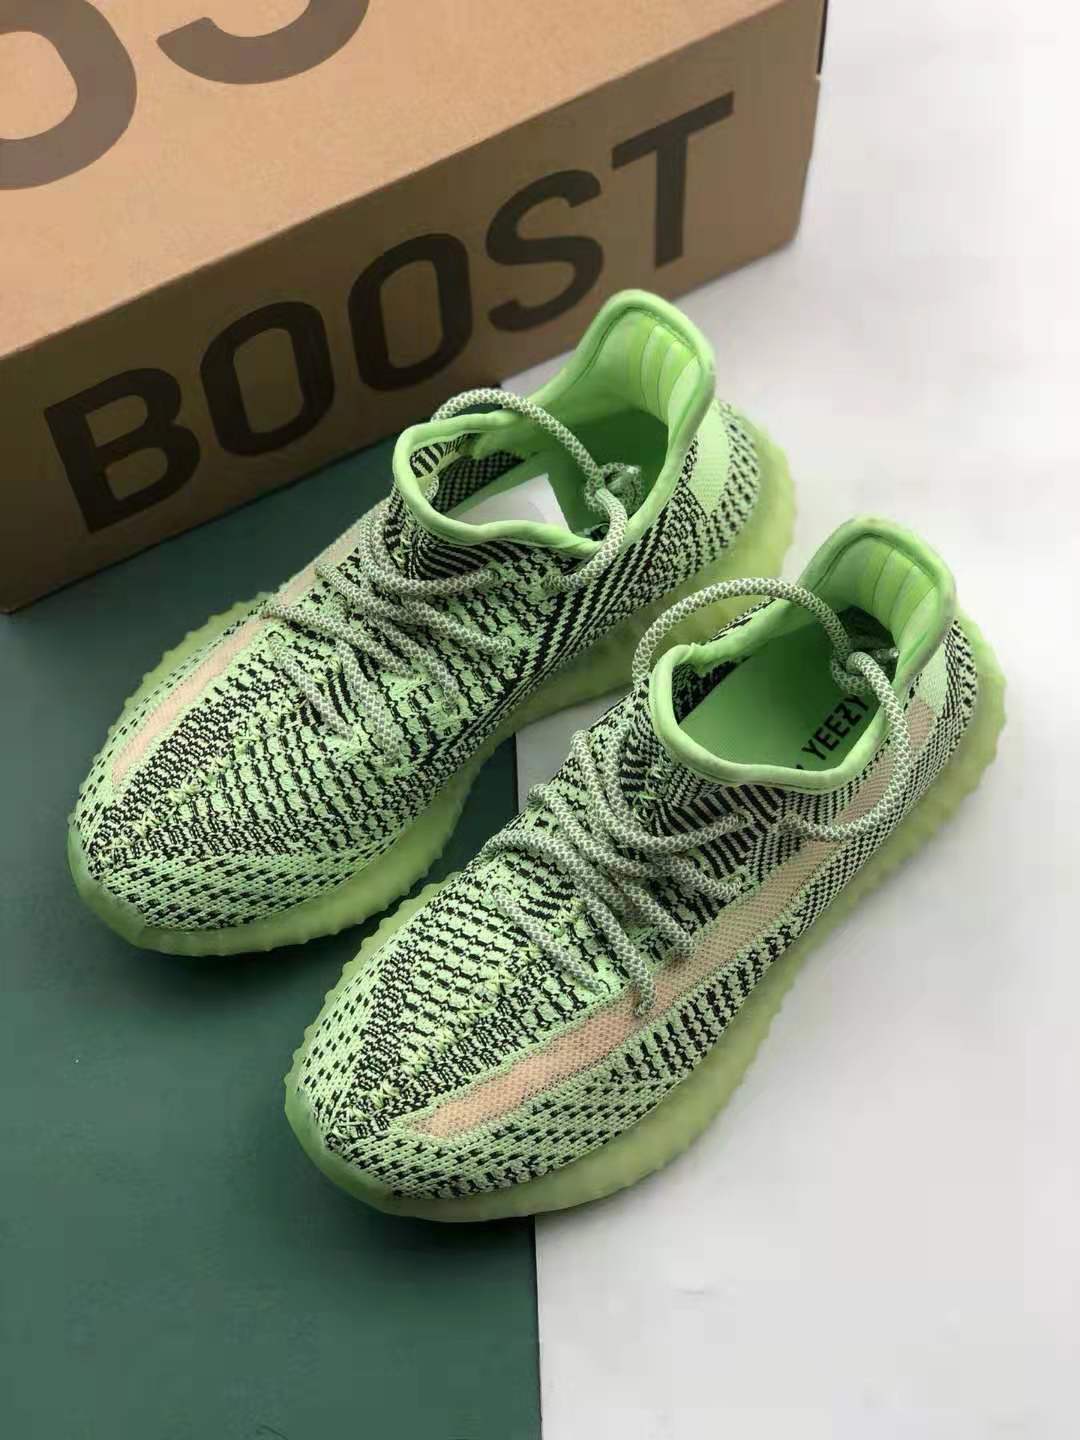 Adidas Yeezy Boost 350 V2 Yeezreel FX4130 - Limited Edition Sneakers